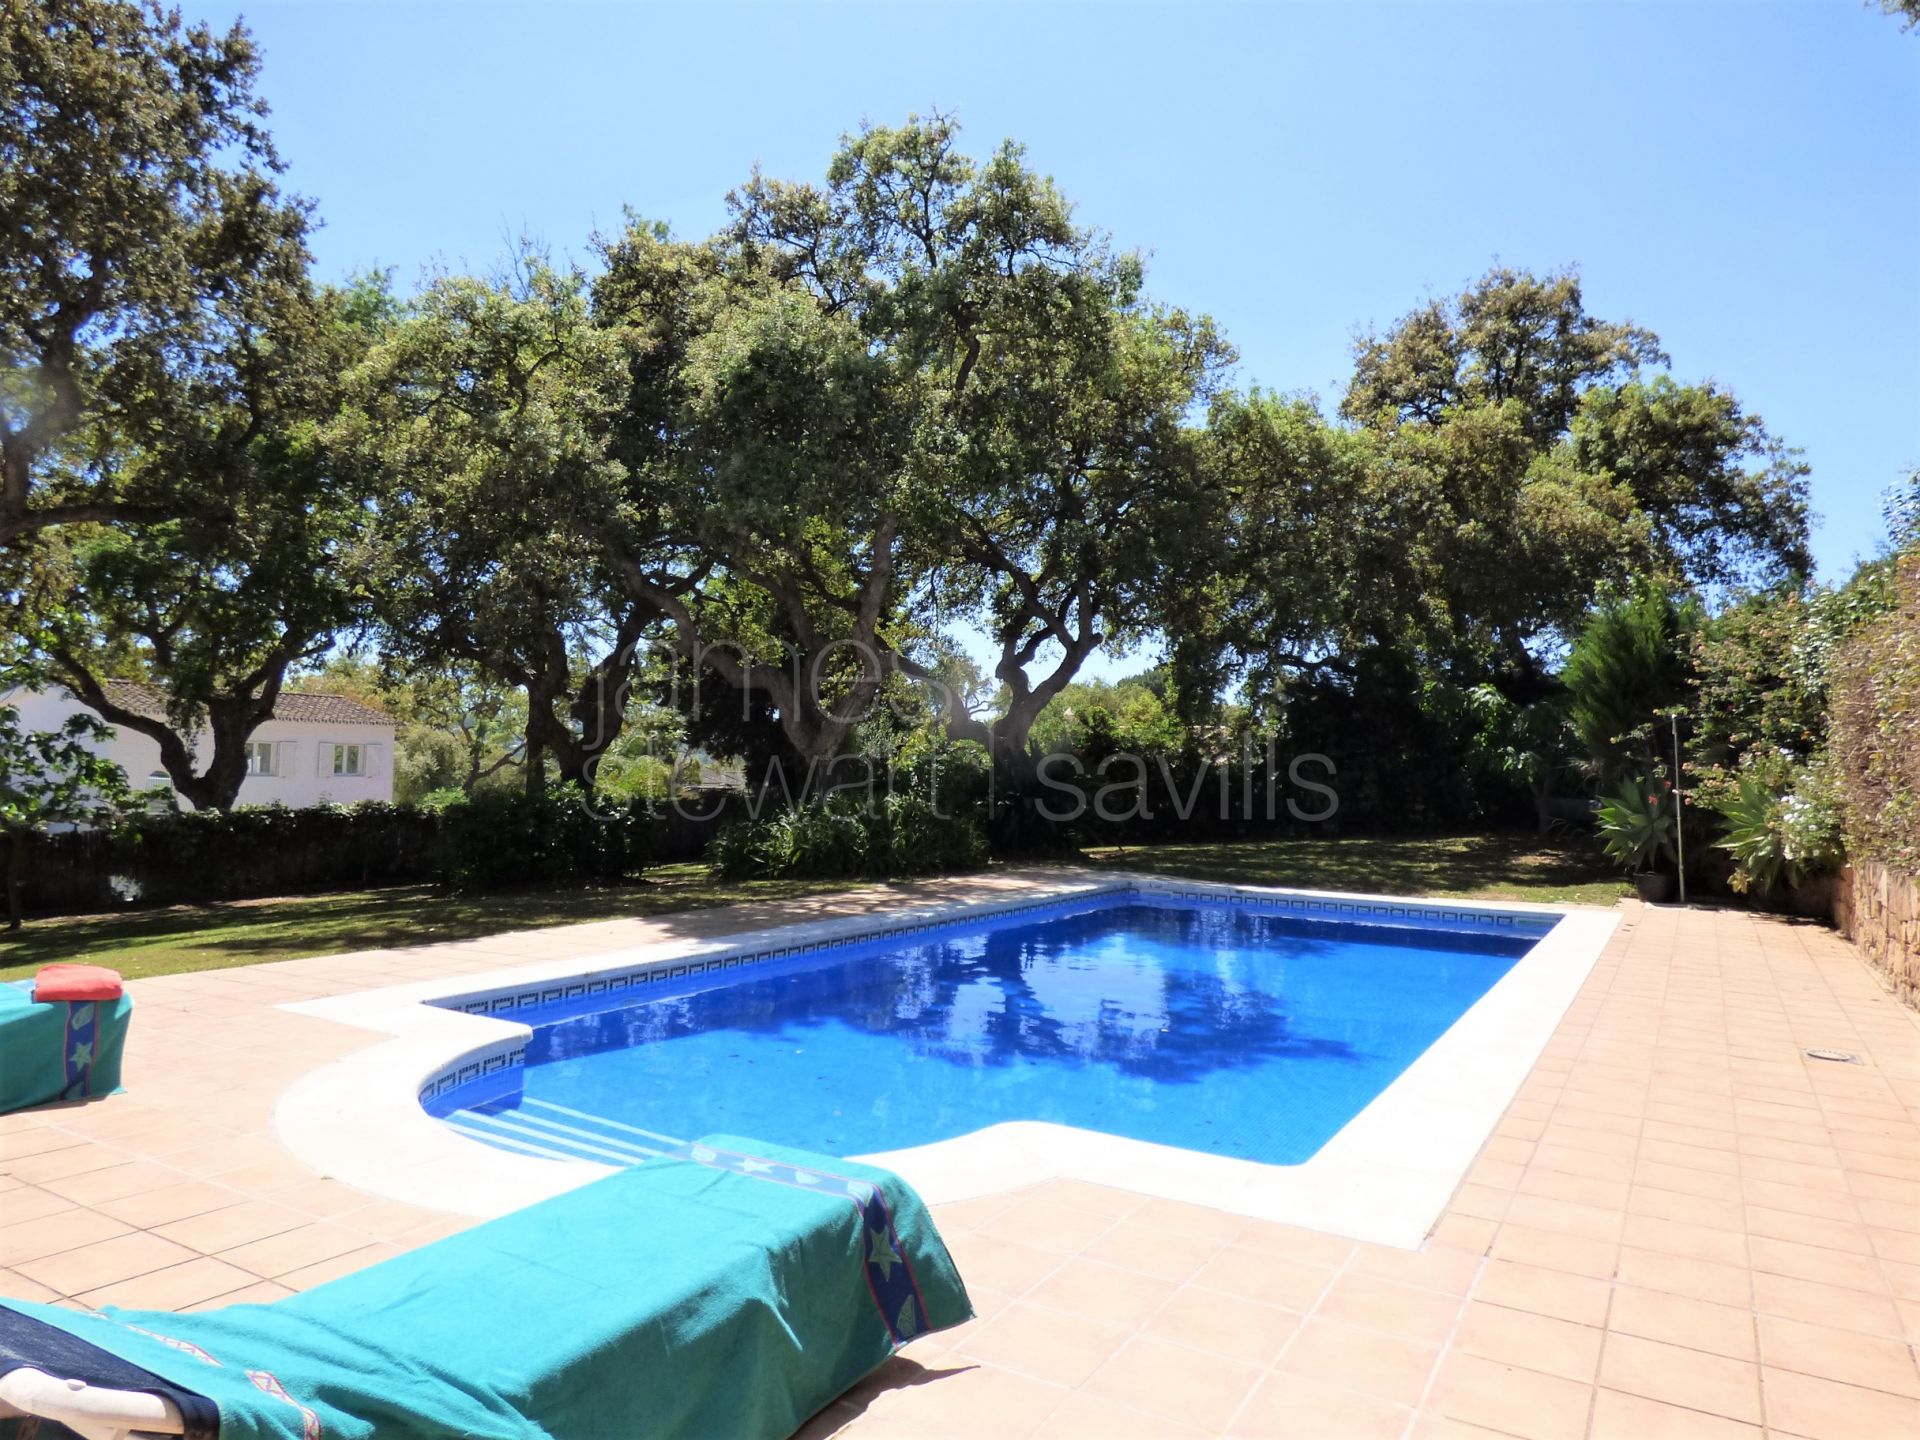 Andaluz style villa on a lovely cork oak filled plot in a quiet road in the Valderrama area